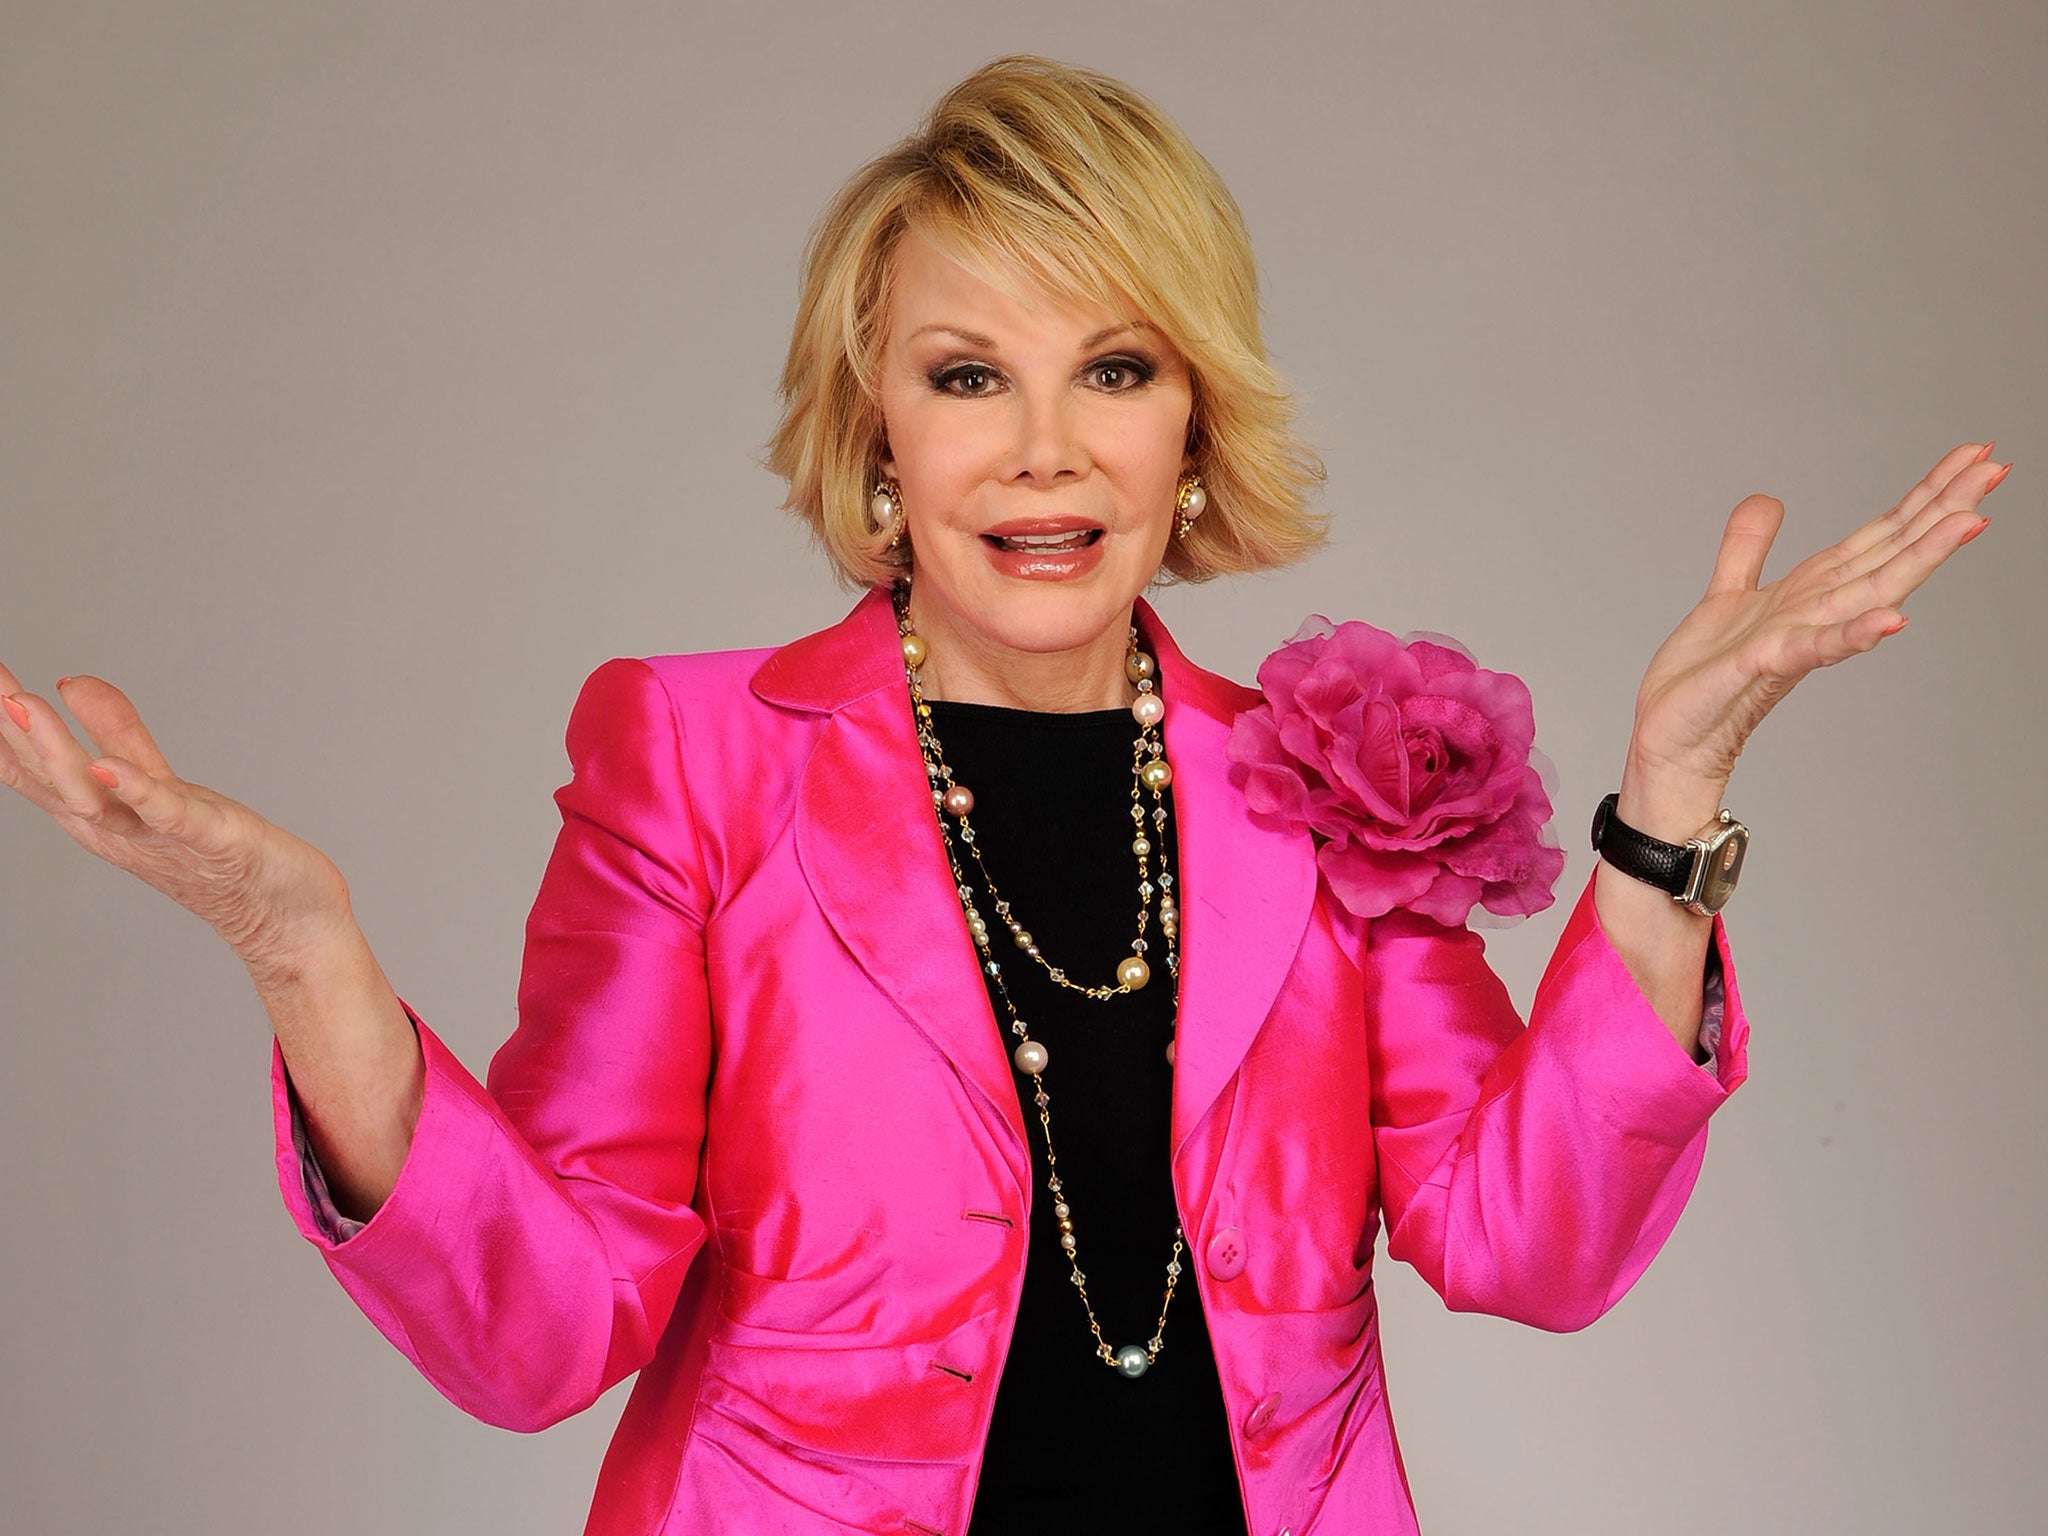 Still from the film 'Joan Rivers - A Piece of Work' attends the Tribeca Film Festival in 2010